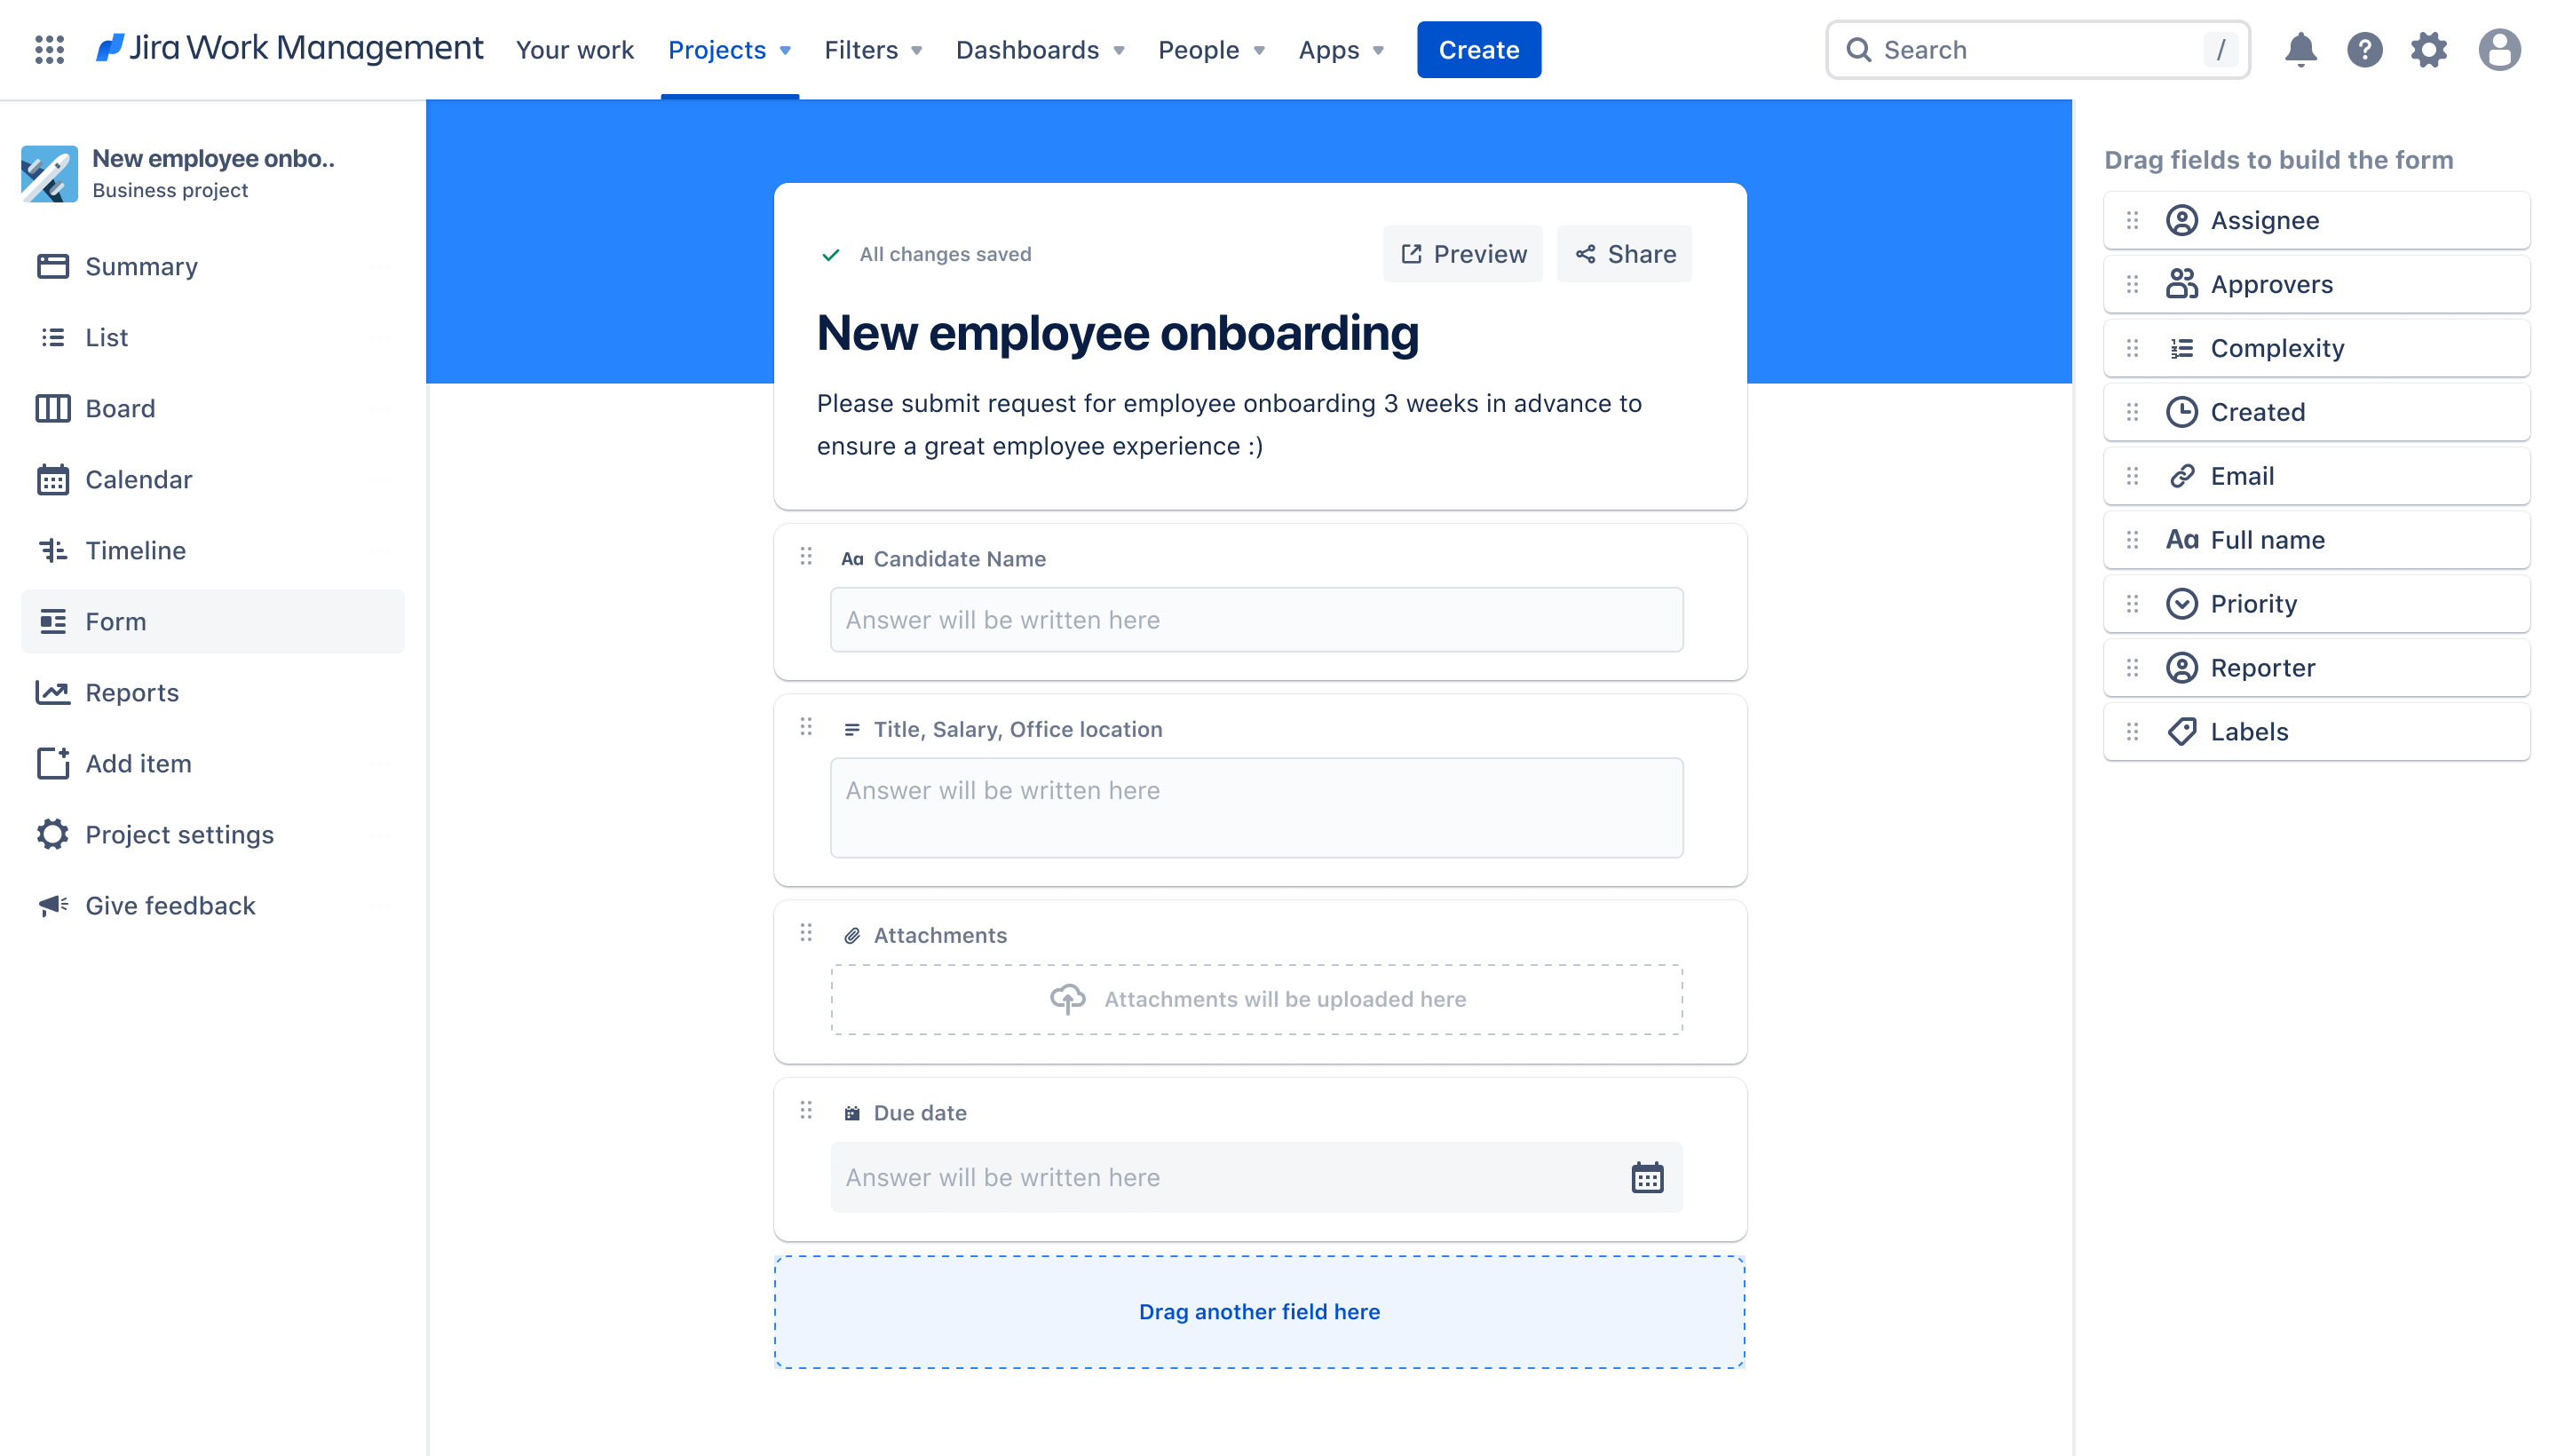 New employee onboarding form on Jira Work Management